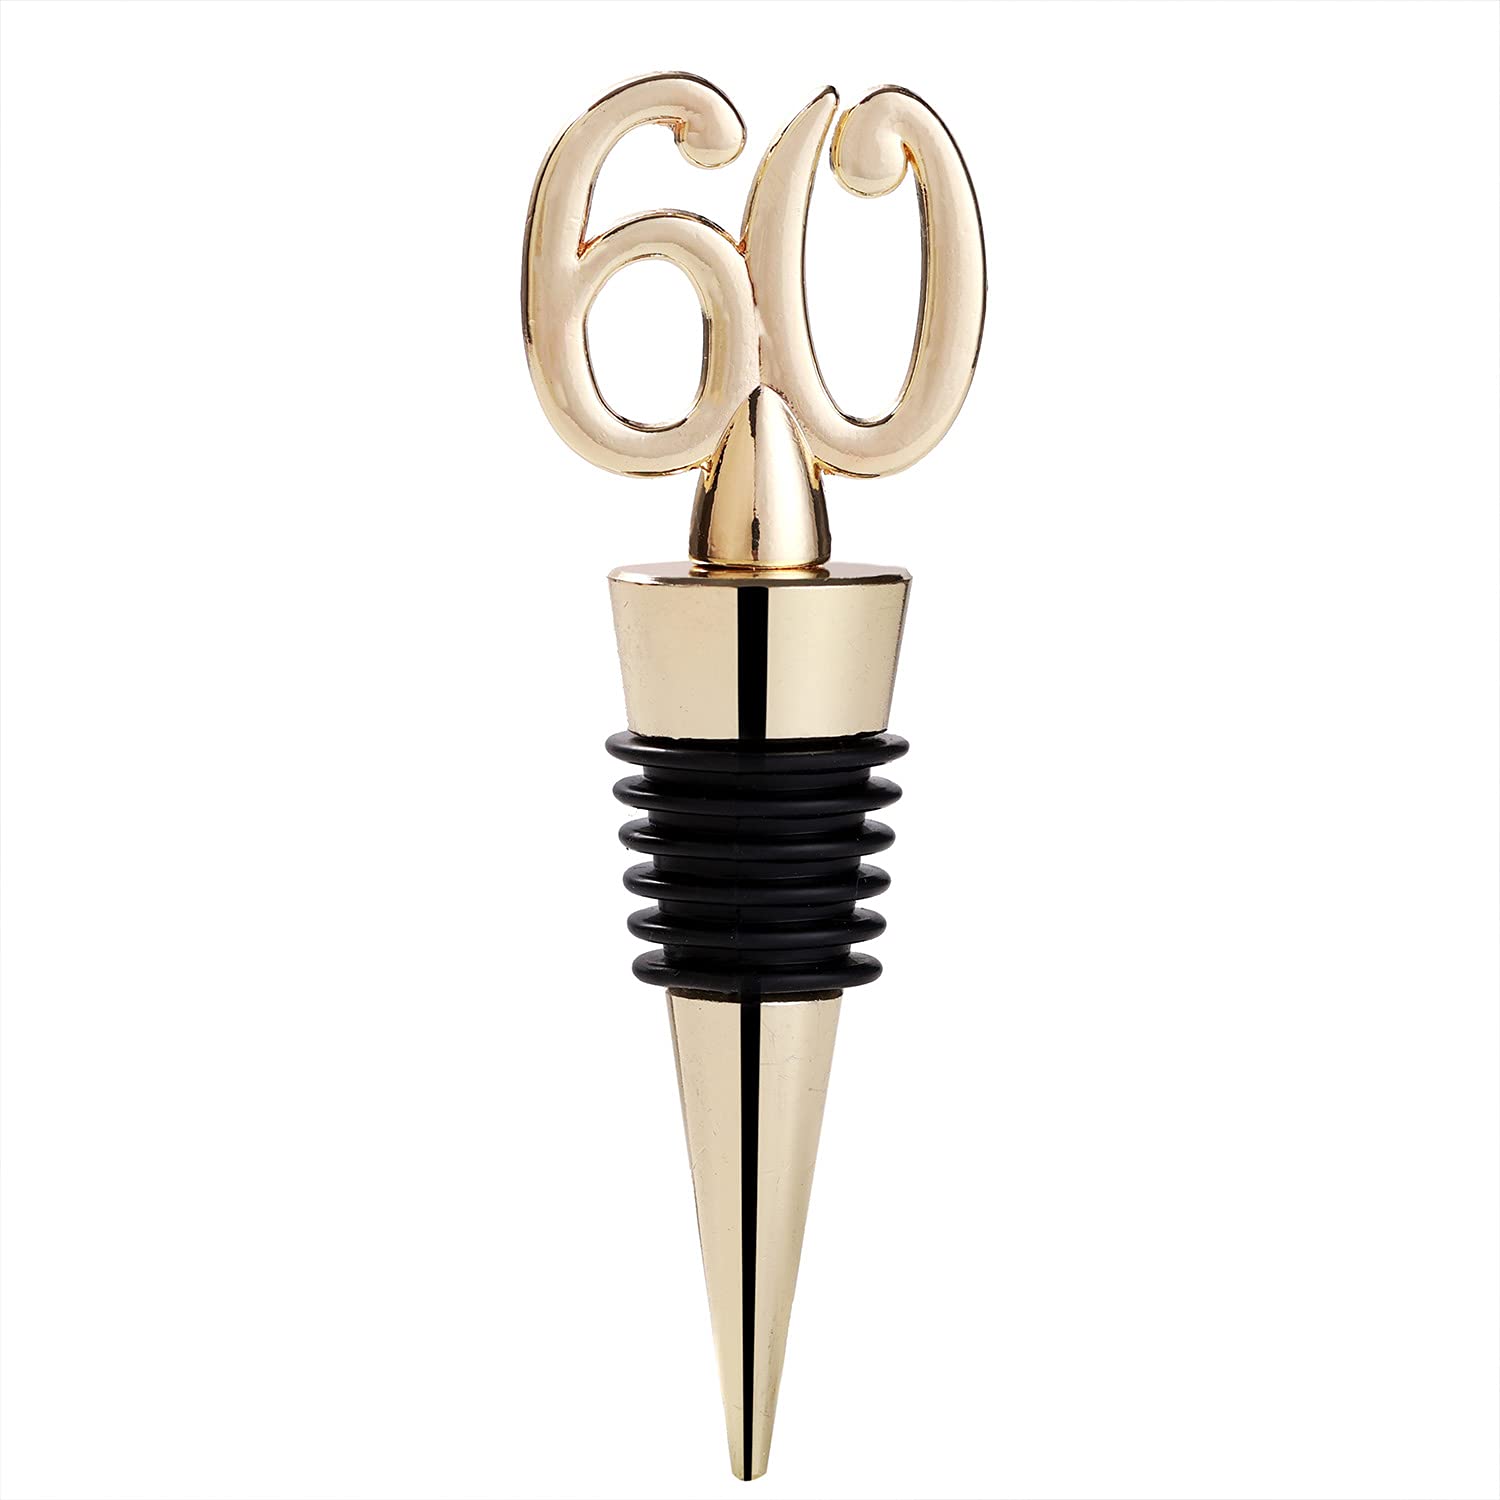 PARTYGOGO 12 Pcs Gold 60 Wine Bottle Stopper for Birthday Anniversary Favor,Beverage Bottle stoppers 60th Birthday Party Wedding Anniversary Keepsake Souvenir Decoration Gift Supplies (Gold 60, 12)